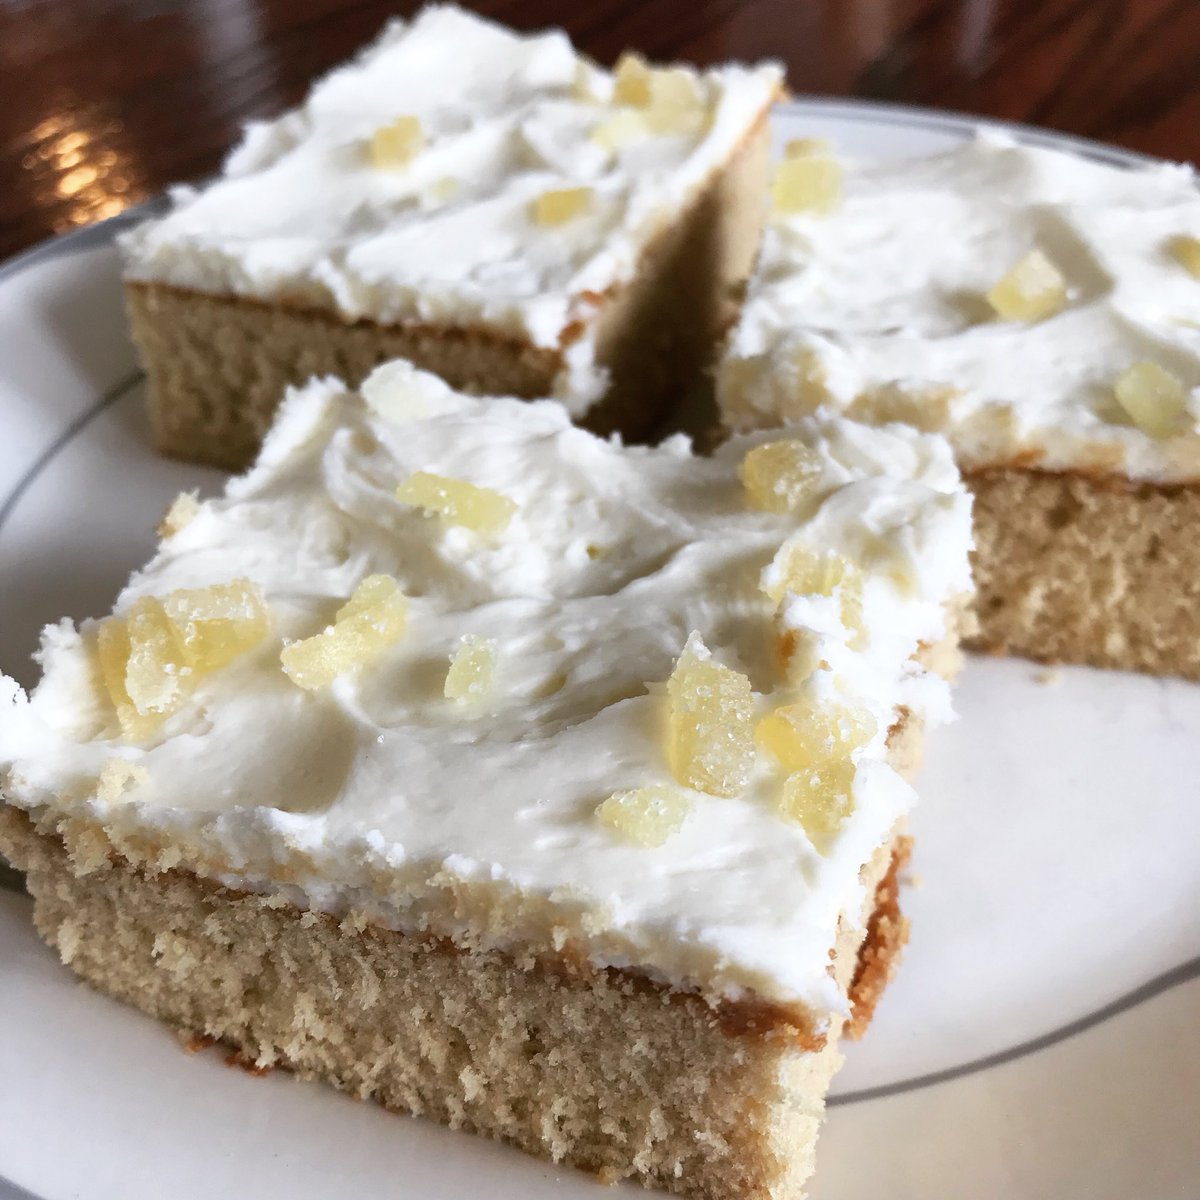 Did you hear our Bourbon Cake was featured on @foodnetwork in the 50 states, 50 cakes article?! We are too excited. We decided to turn it into a cake square for something fun and added a little crystallized ginger on top. Bourbon and ginger are a match made in heaven 👌🏻